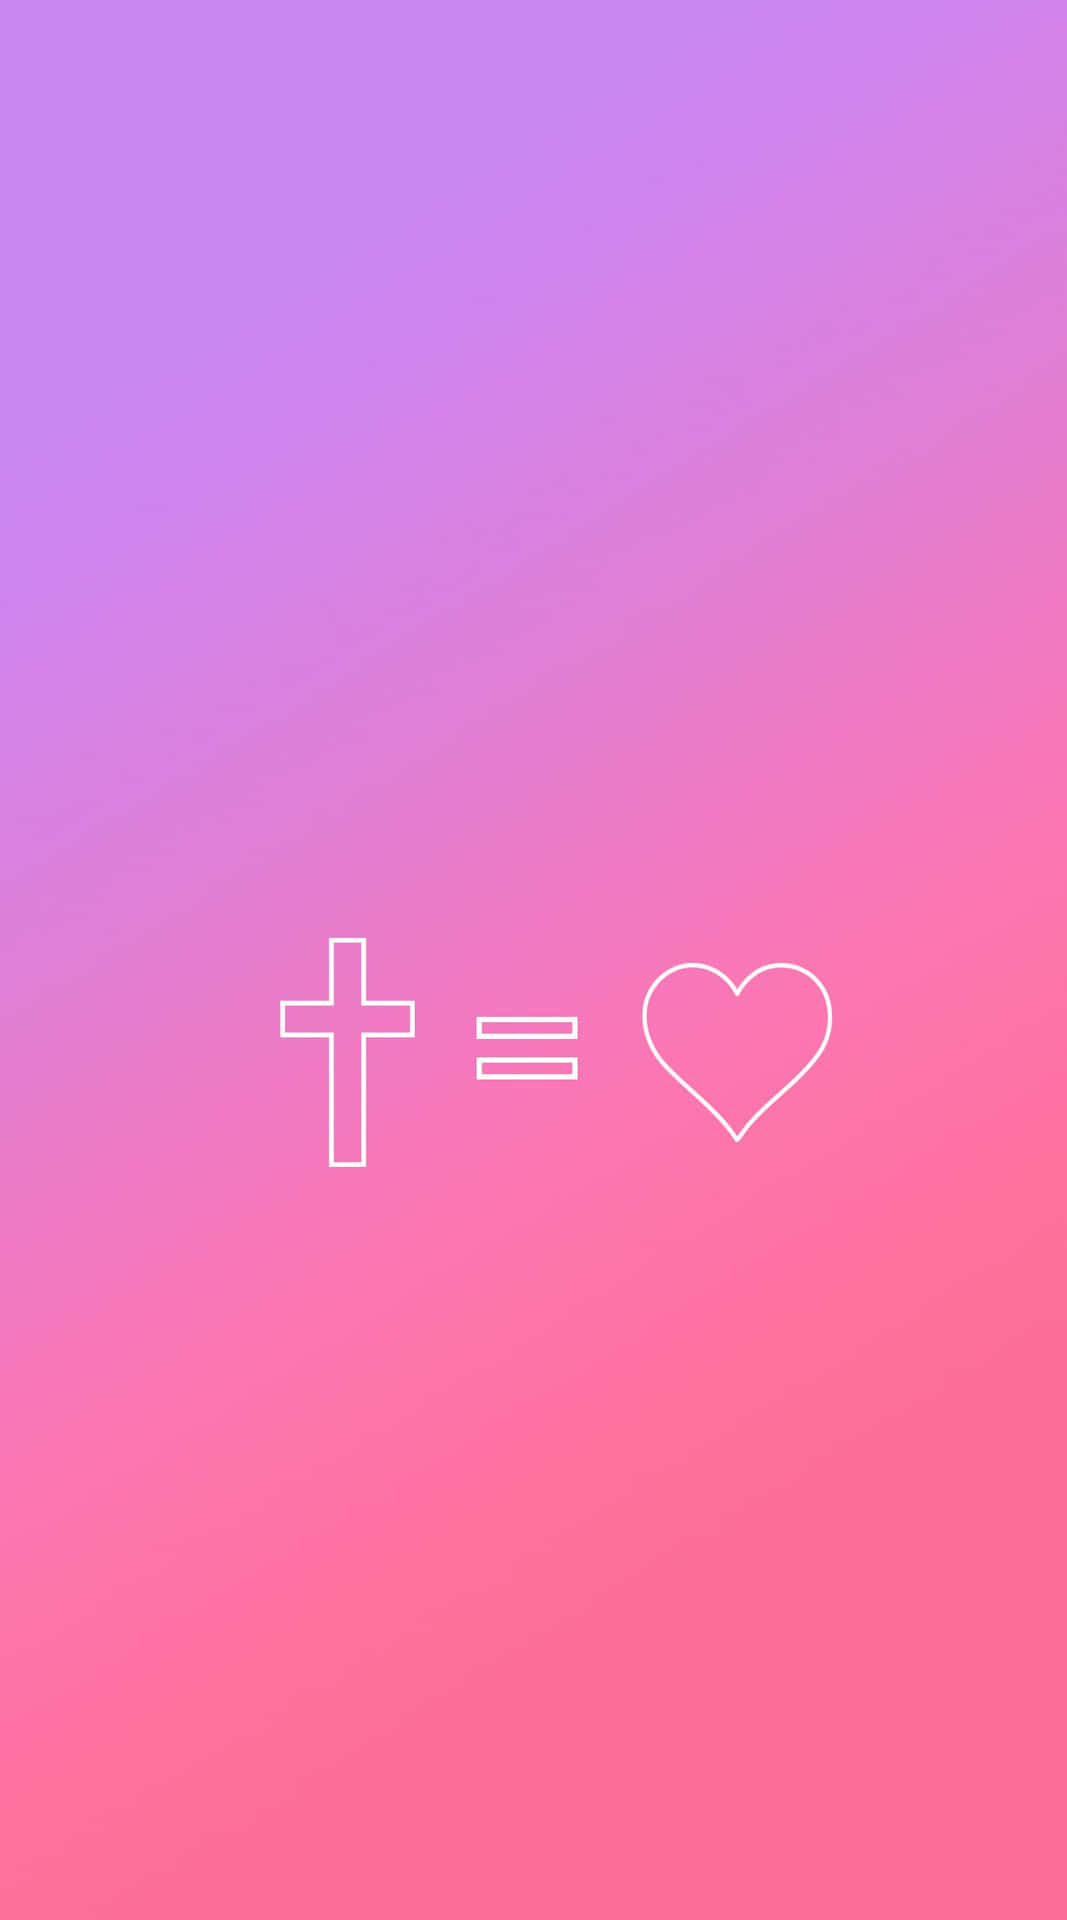 An aesthetic pink-hued display of faith Wallpaper